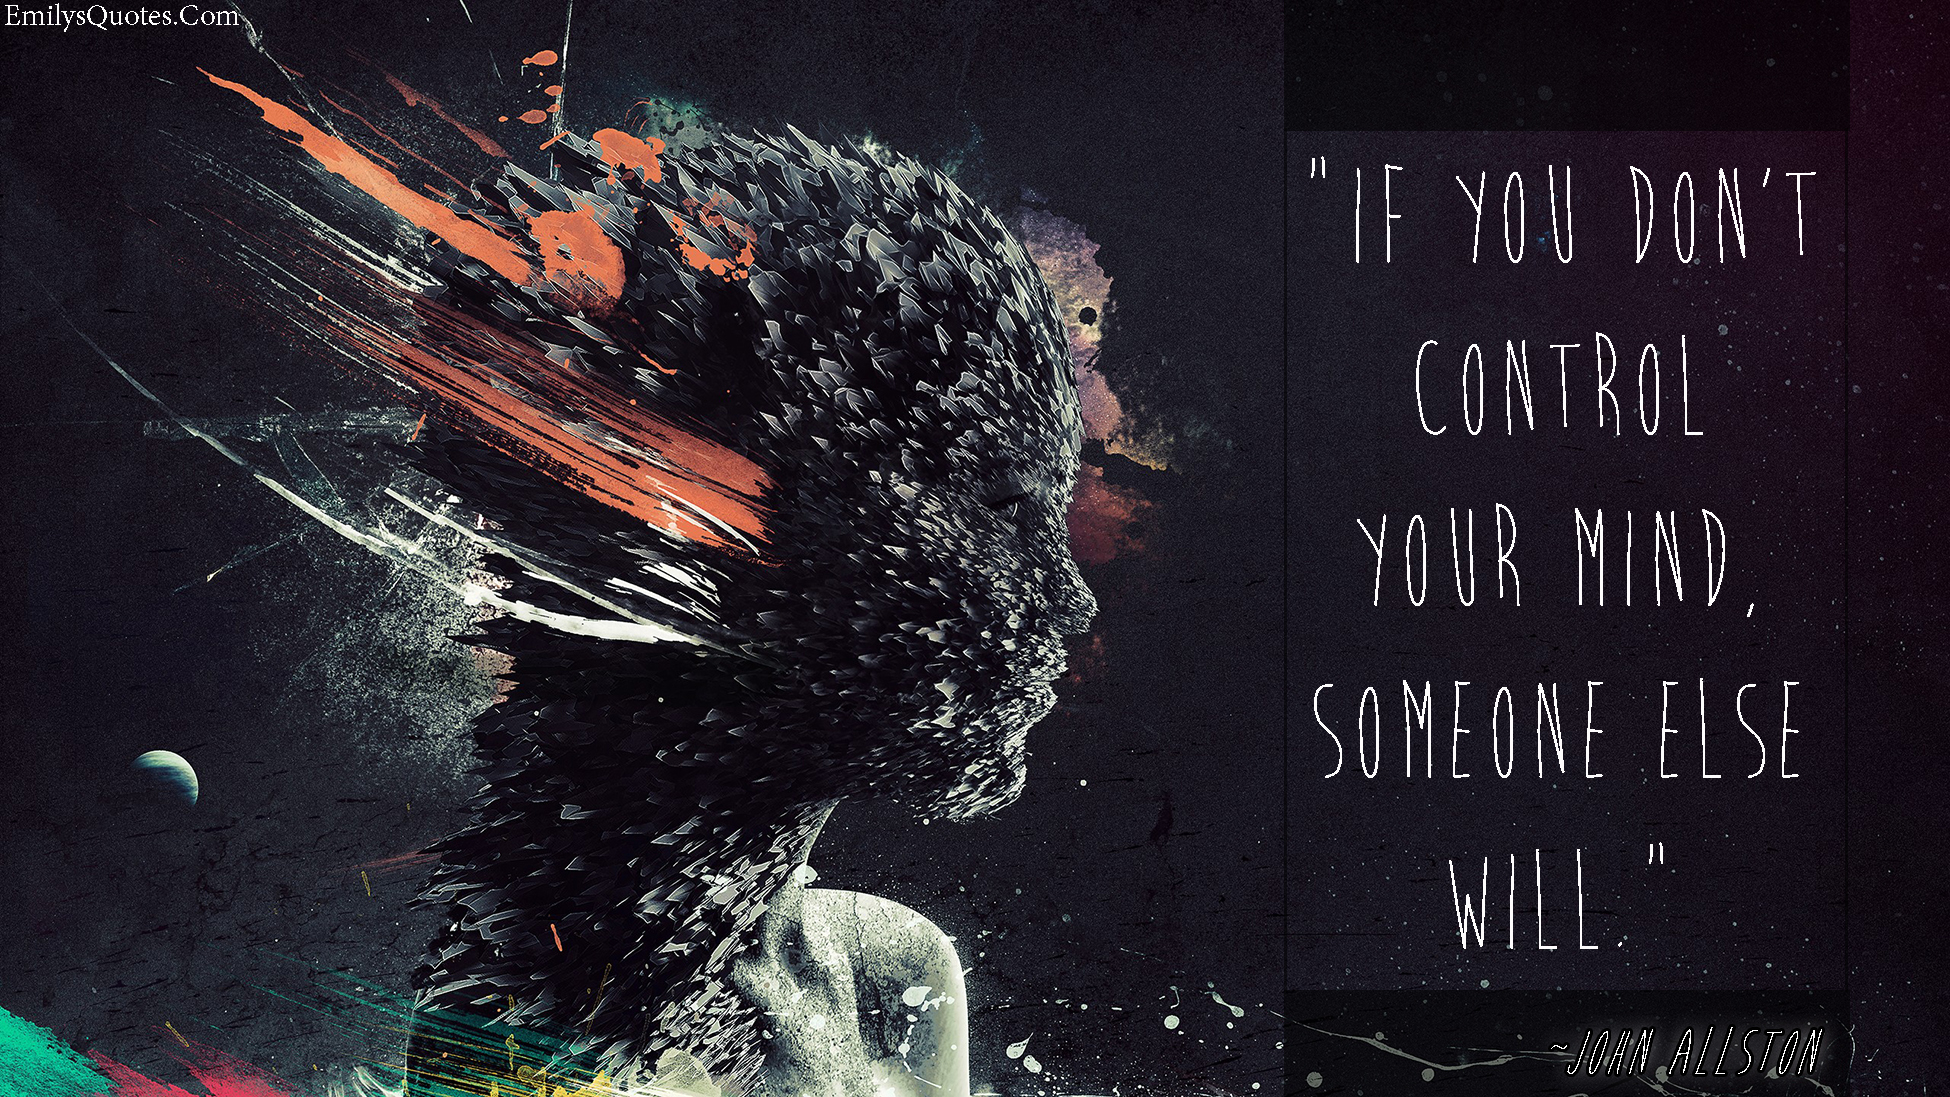 If you don’t control your mind, someone else will